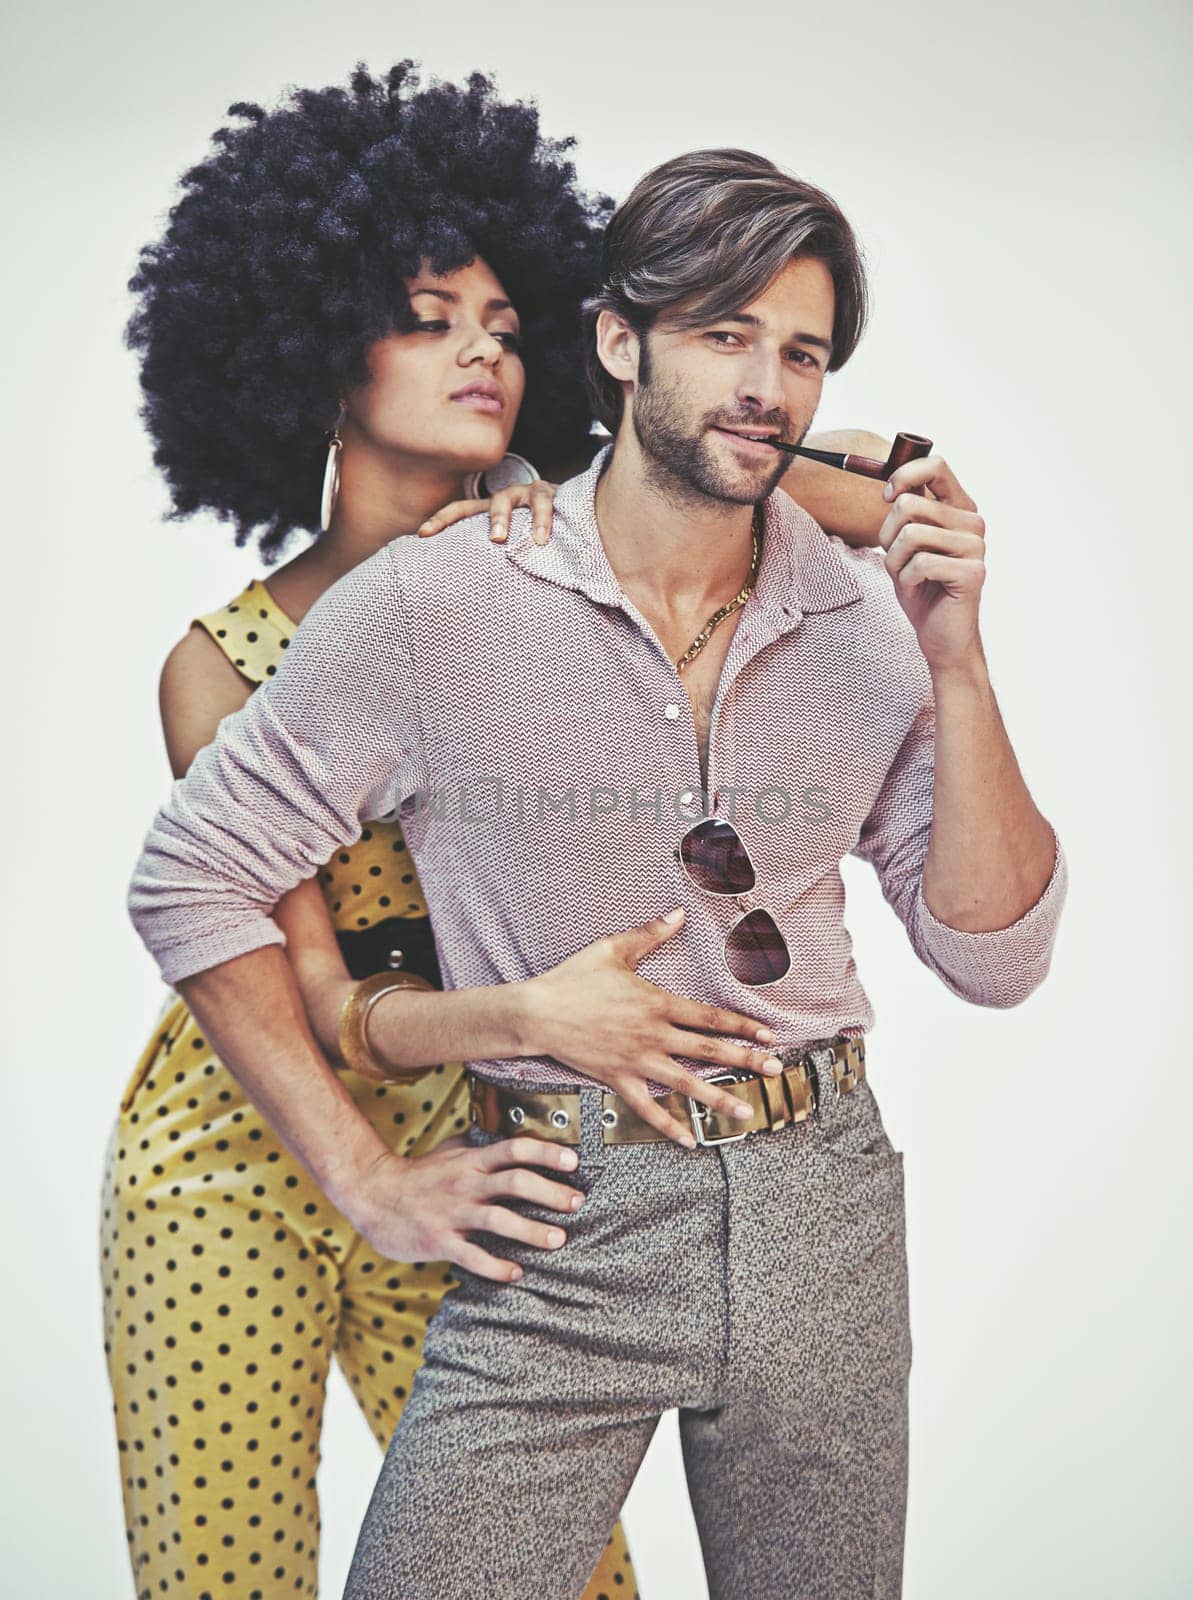 Couple, portrait and fashion with pipe for smoking, style or outfit on a gray studio background. Young interracial man, woman or smoker in stylish pants, shirt or jumpsuit with jewelry or accessories by YuriArcurs